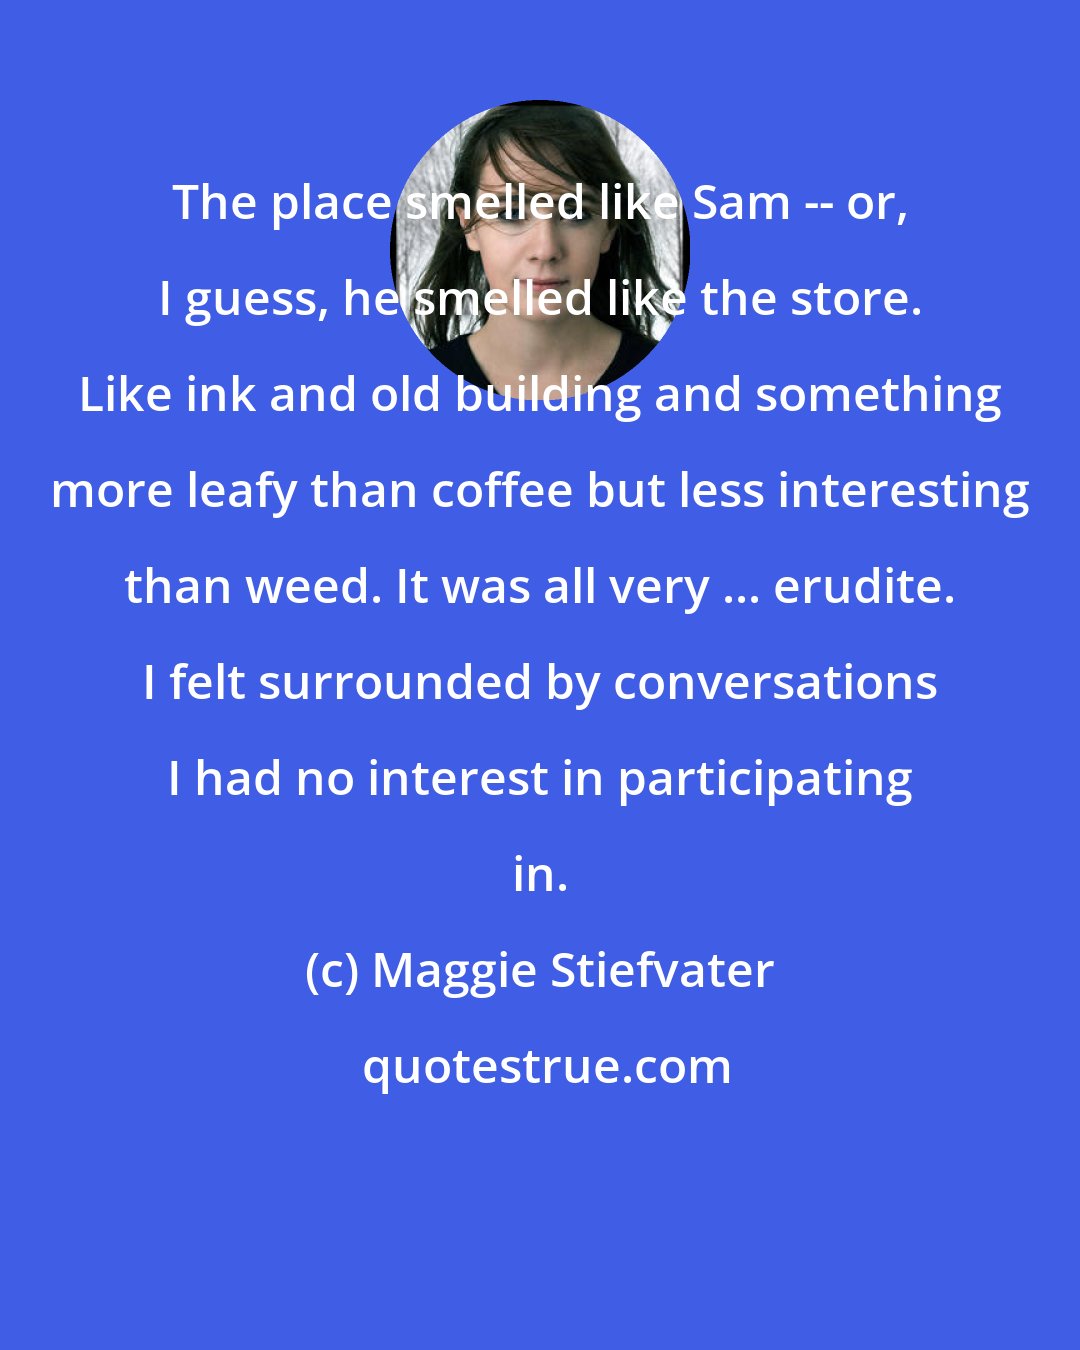 Maggie Stiefvater: The place smelled like Sam -- or, I guess, he smelled like the store. Like ink and old building and something more leafy than coffee but less interesting than weed. It was all very ... erudite. I felt surrounded by conversations I had no interest in participating in.